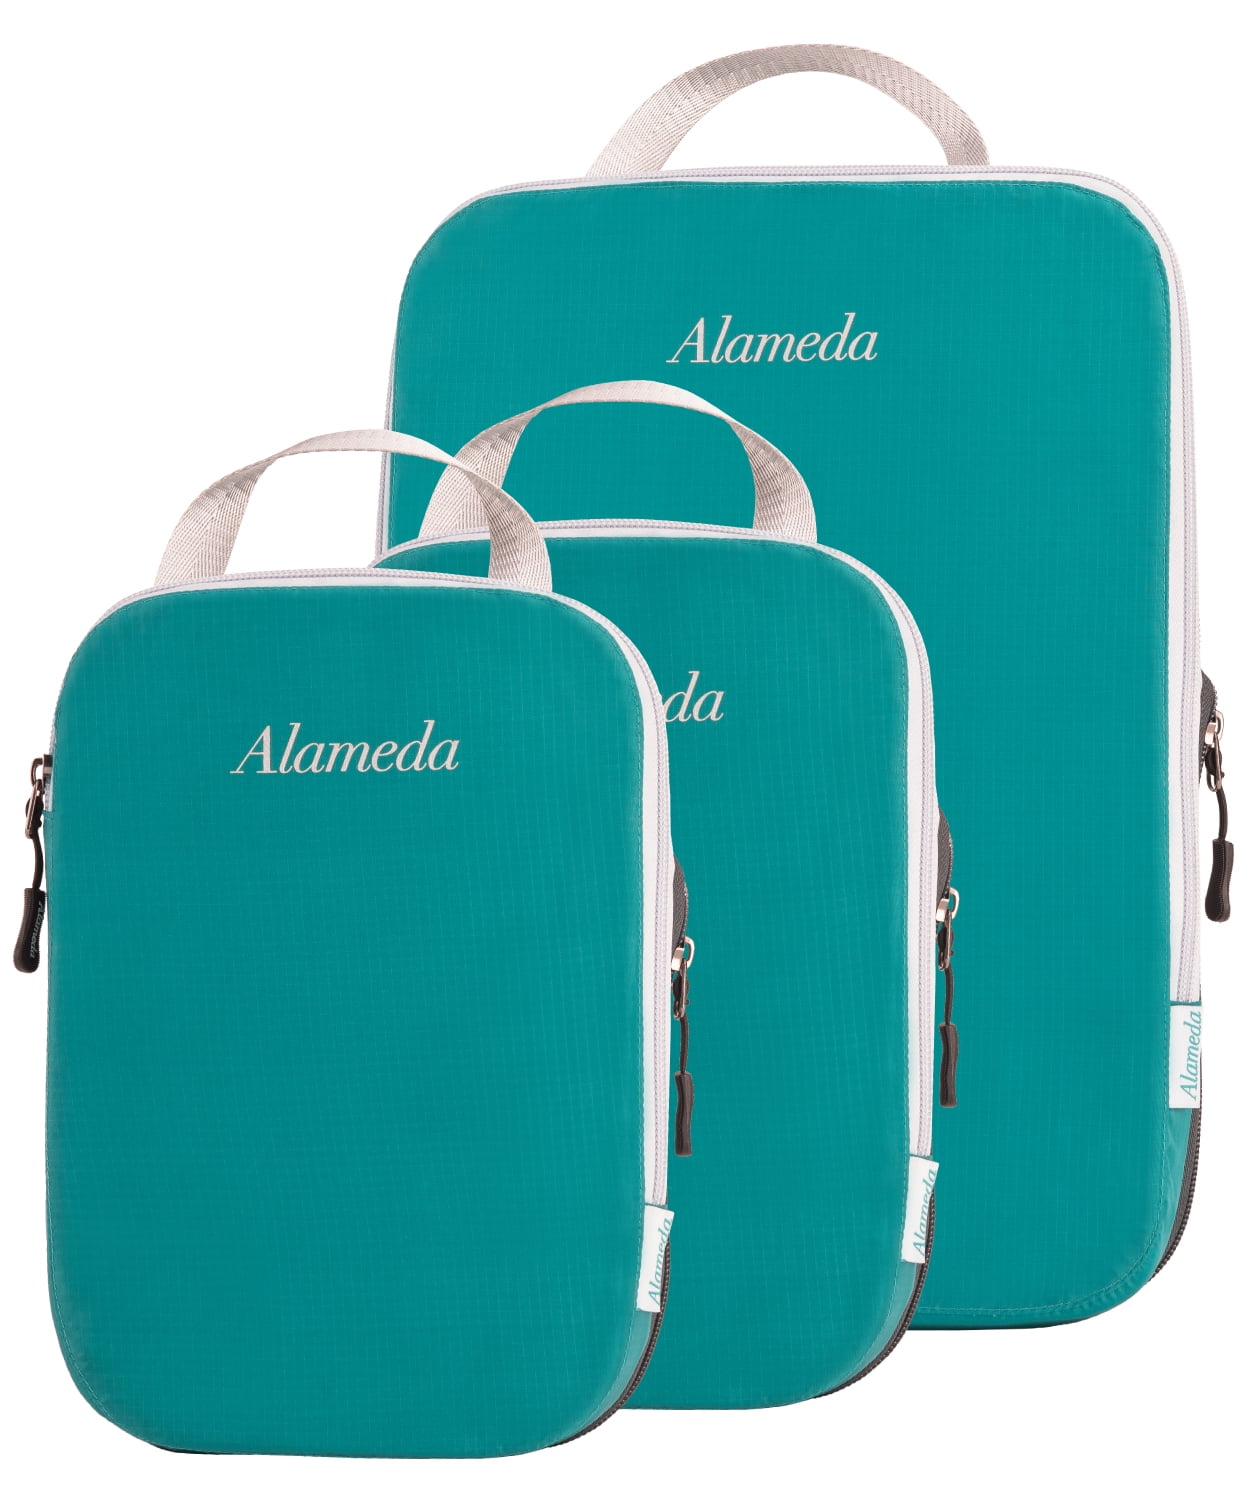  Alameda 4 Set Compression Packing Cubes for Suitcases -  Lightweight Compression Packing Cubes Travel for Backpack Carry-on  Organizer Bags with Shoe Bag Aqua Sky(L+L+S+Shoes bag)